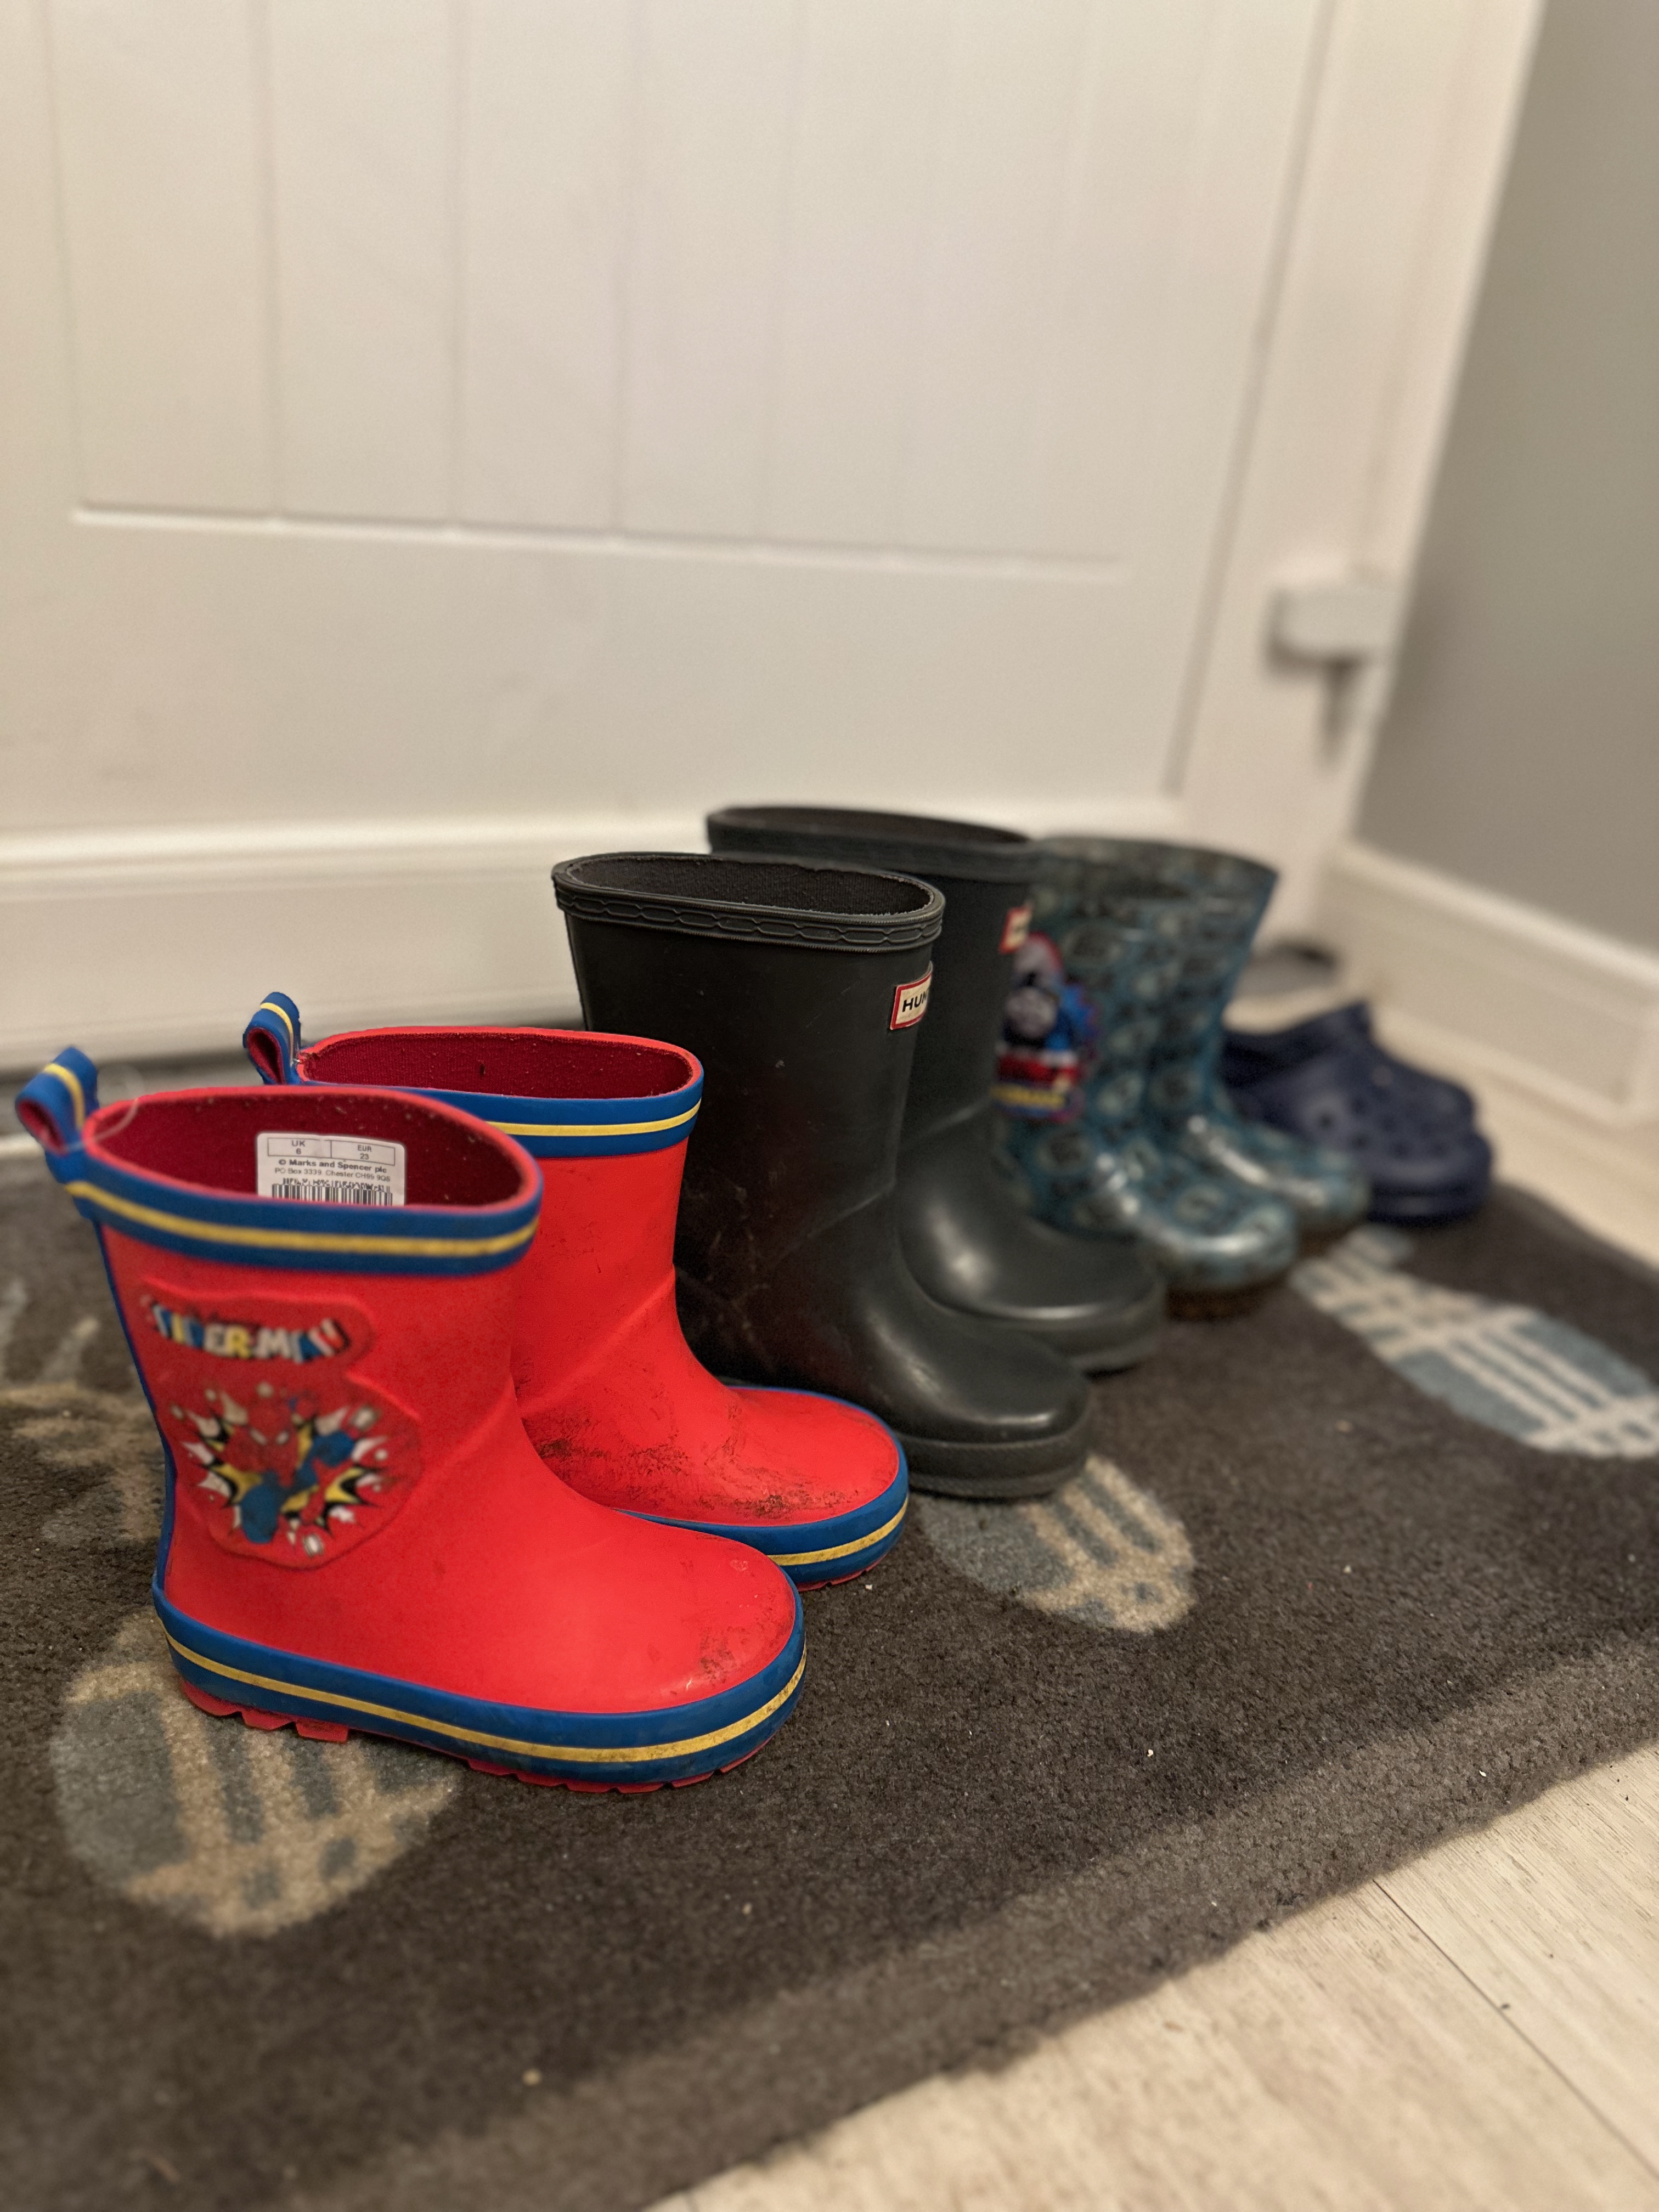 Arthur's array of wellies (and a stray pair of crocs)